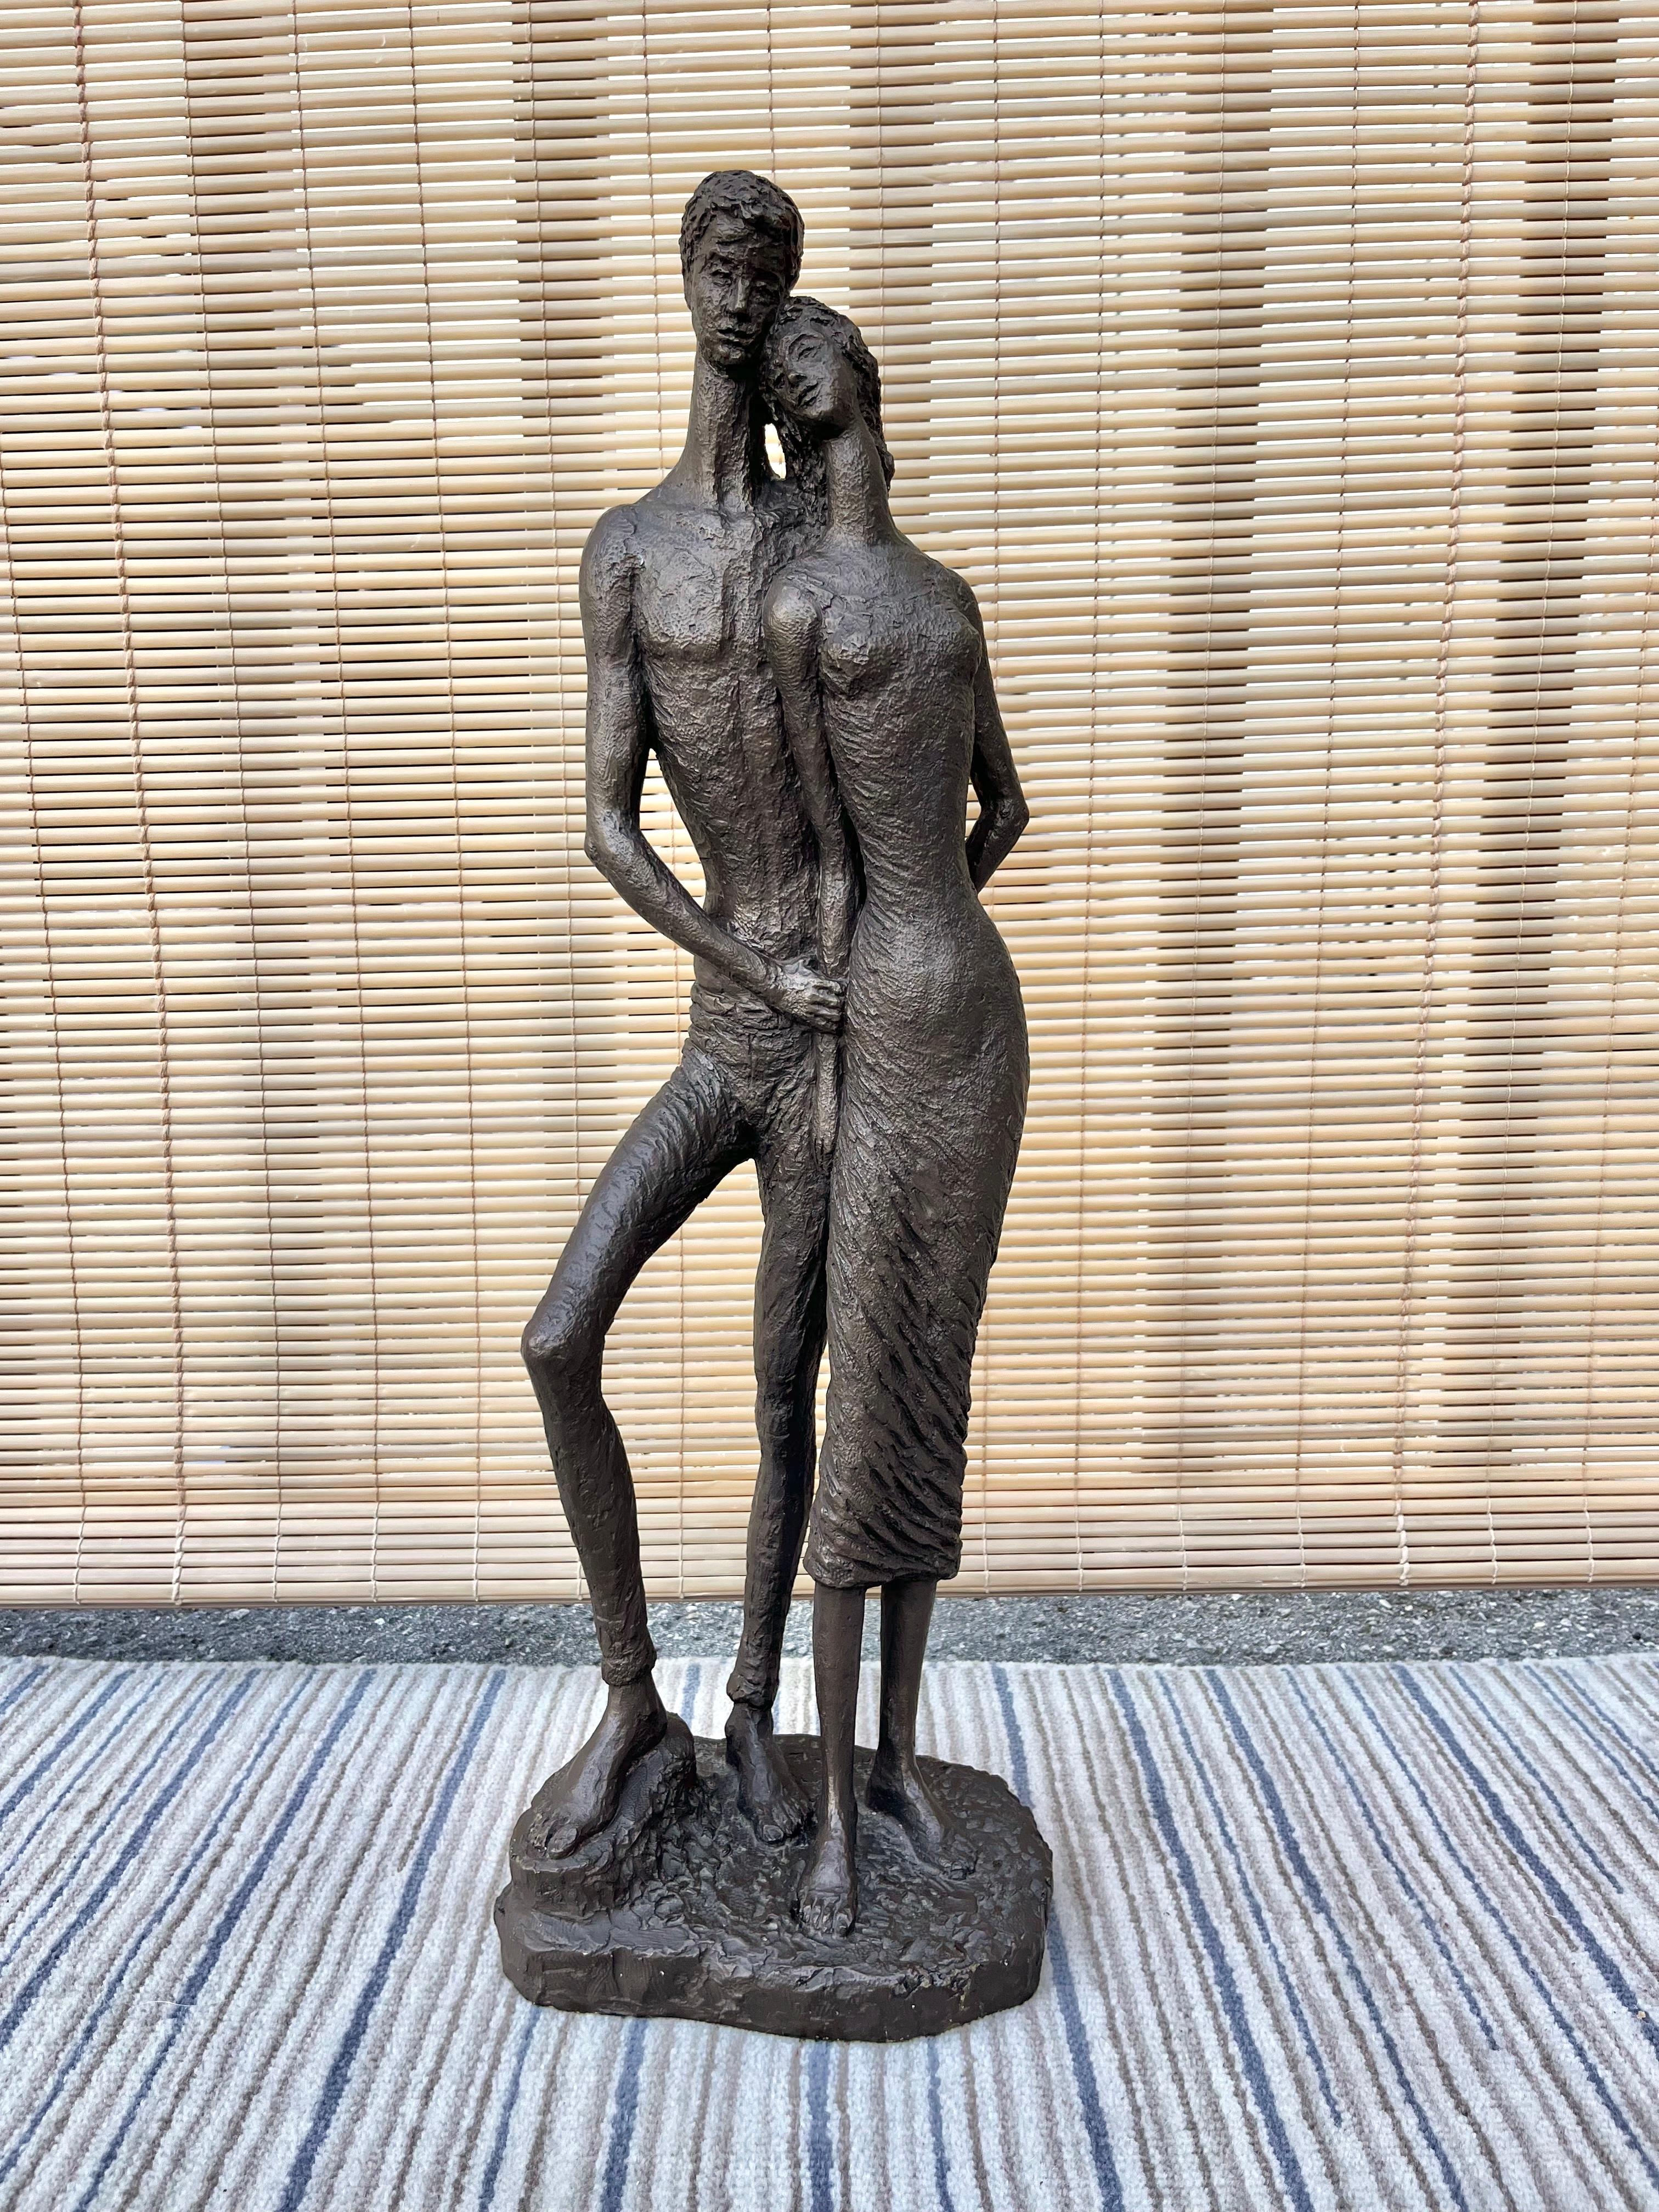 Large Mid-Century Modern Brutalist sculpture by Edward Schillaci for Austin Production. Signed by the artist. Dated 1962.
Features a textured image of a standing couple holding hands. 
Good original condition with minor signs of wear consistent